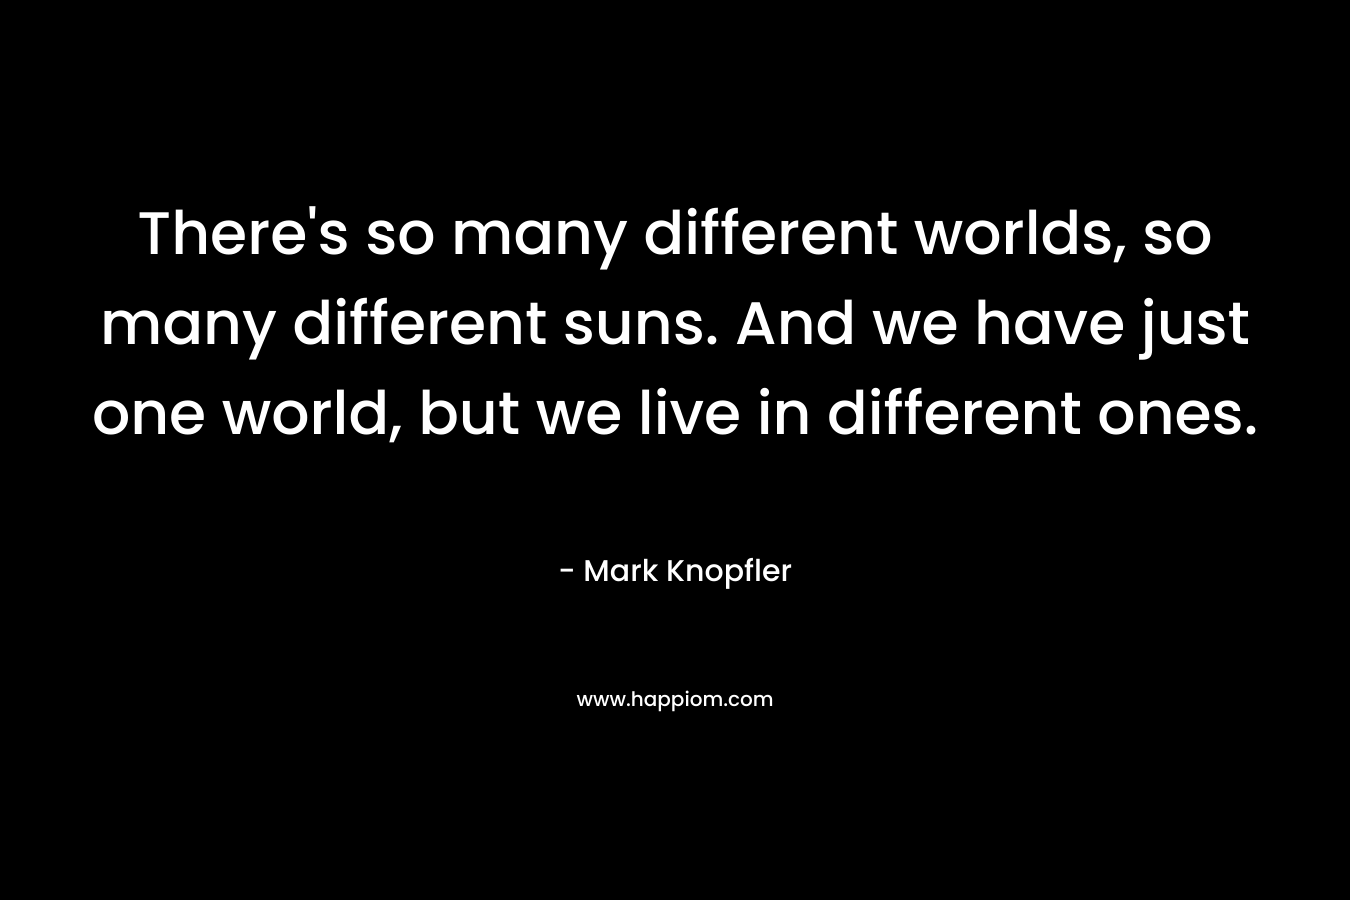 There’s so many different worlds, so many different suns. And we have just one world, but we live in different ones. – Mark Knopfler